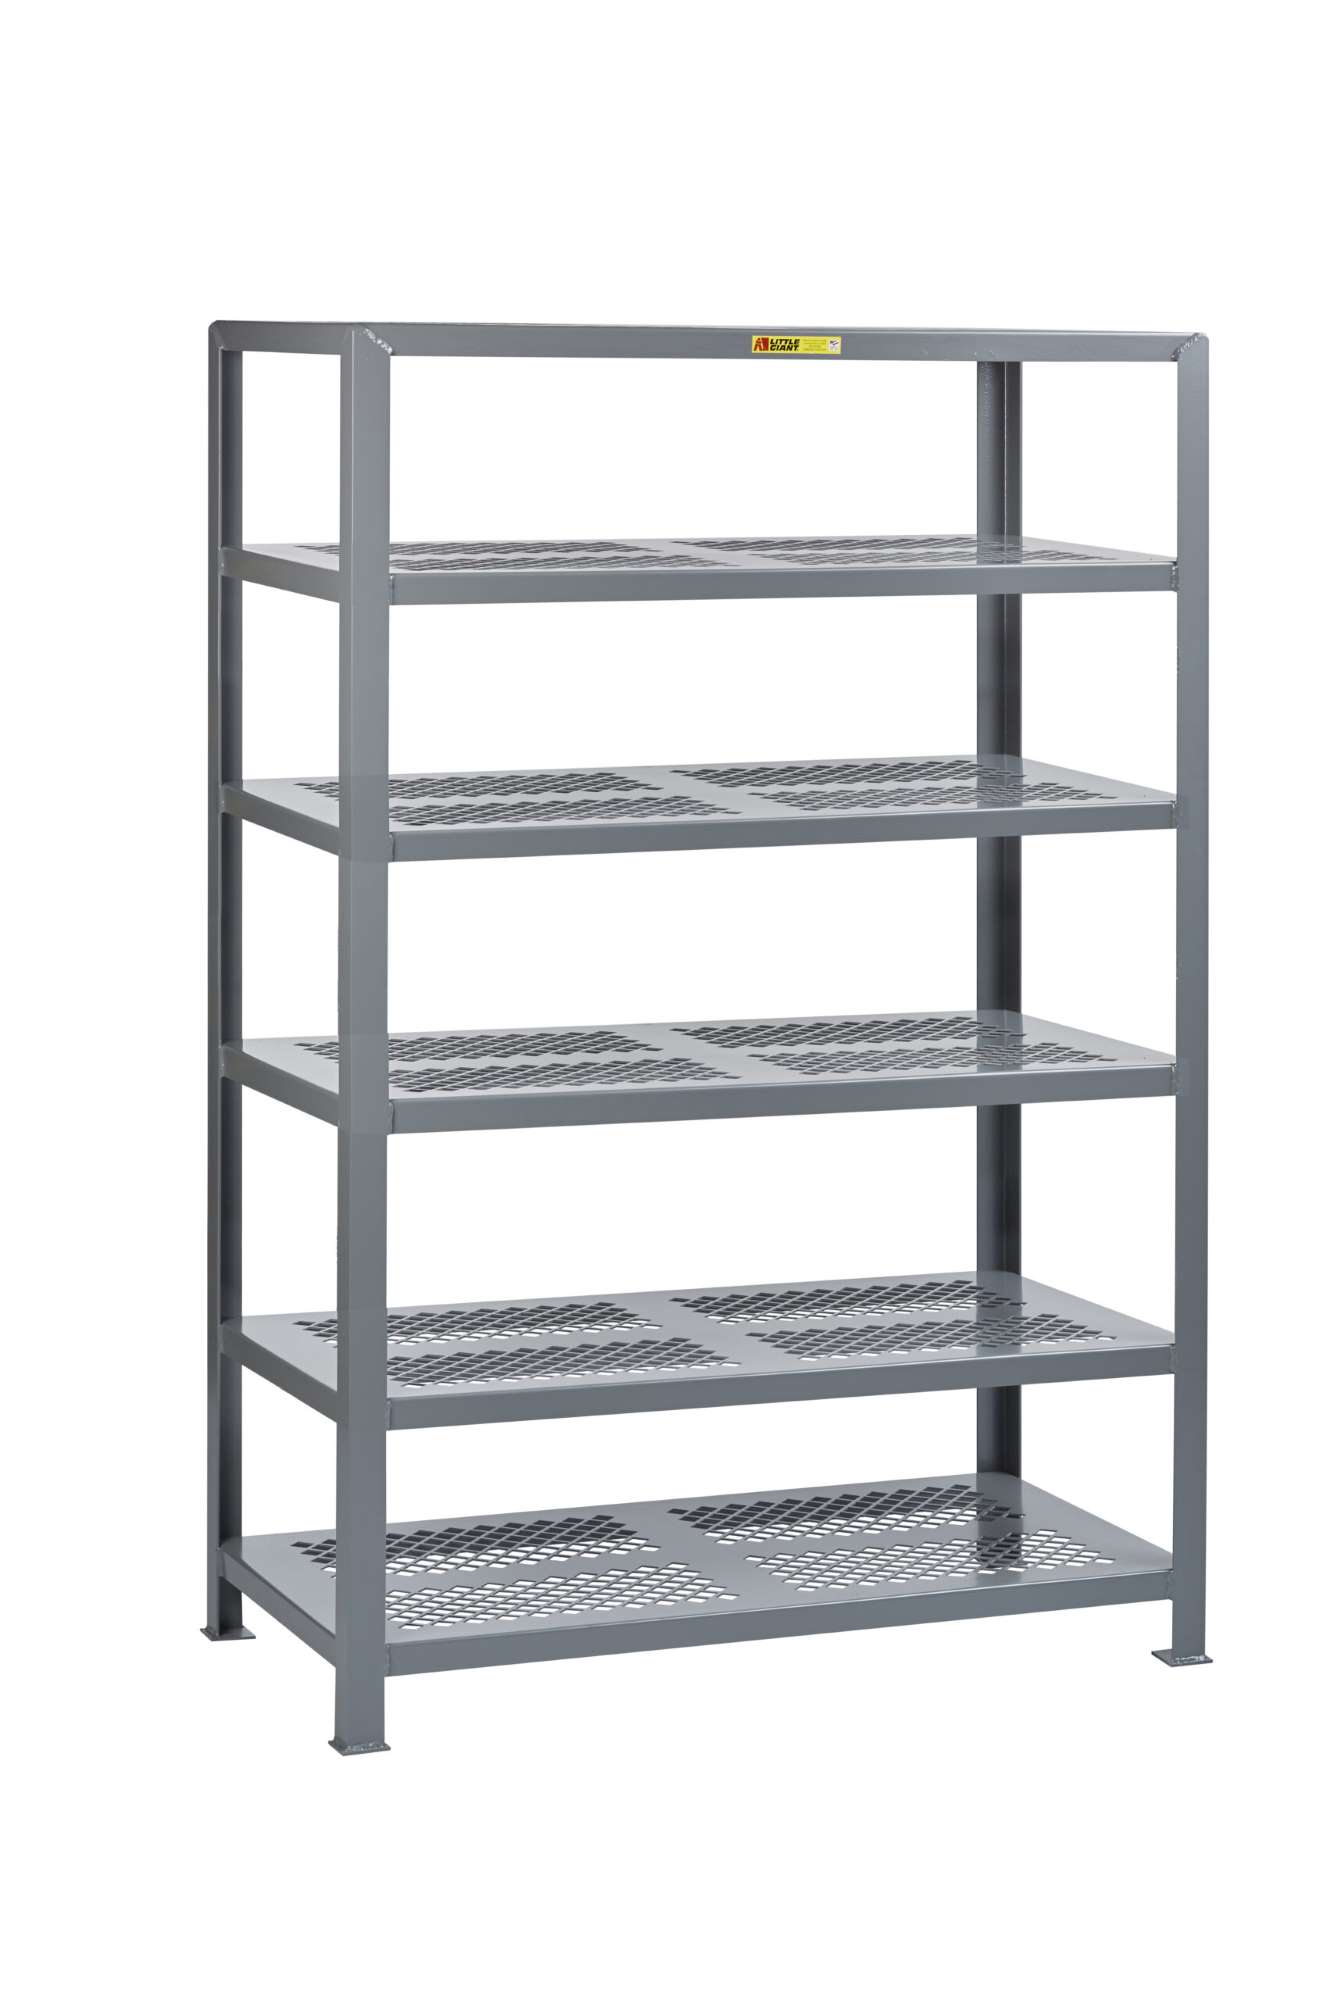 Little Giant Perforated Steel Shelving, 6 perforated shelves, All welded